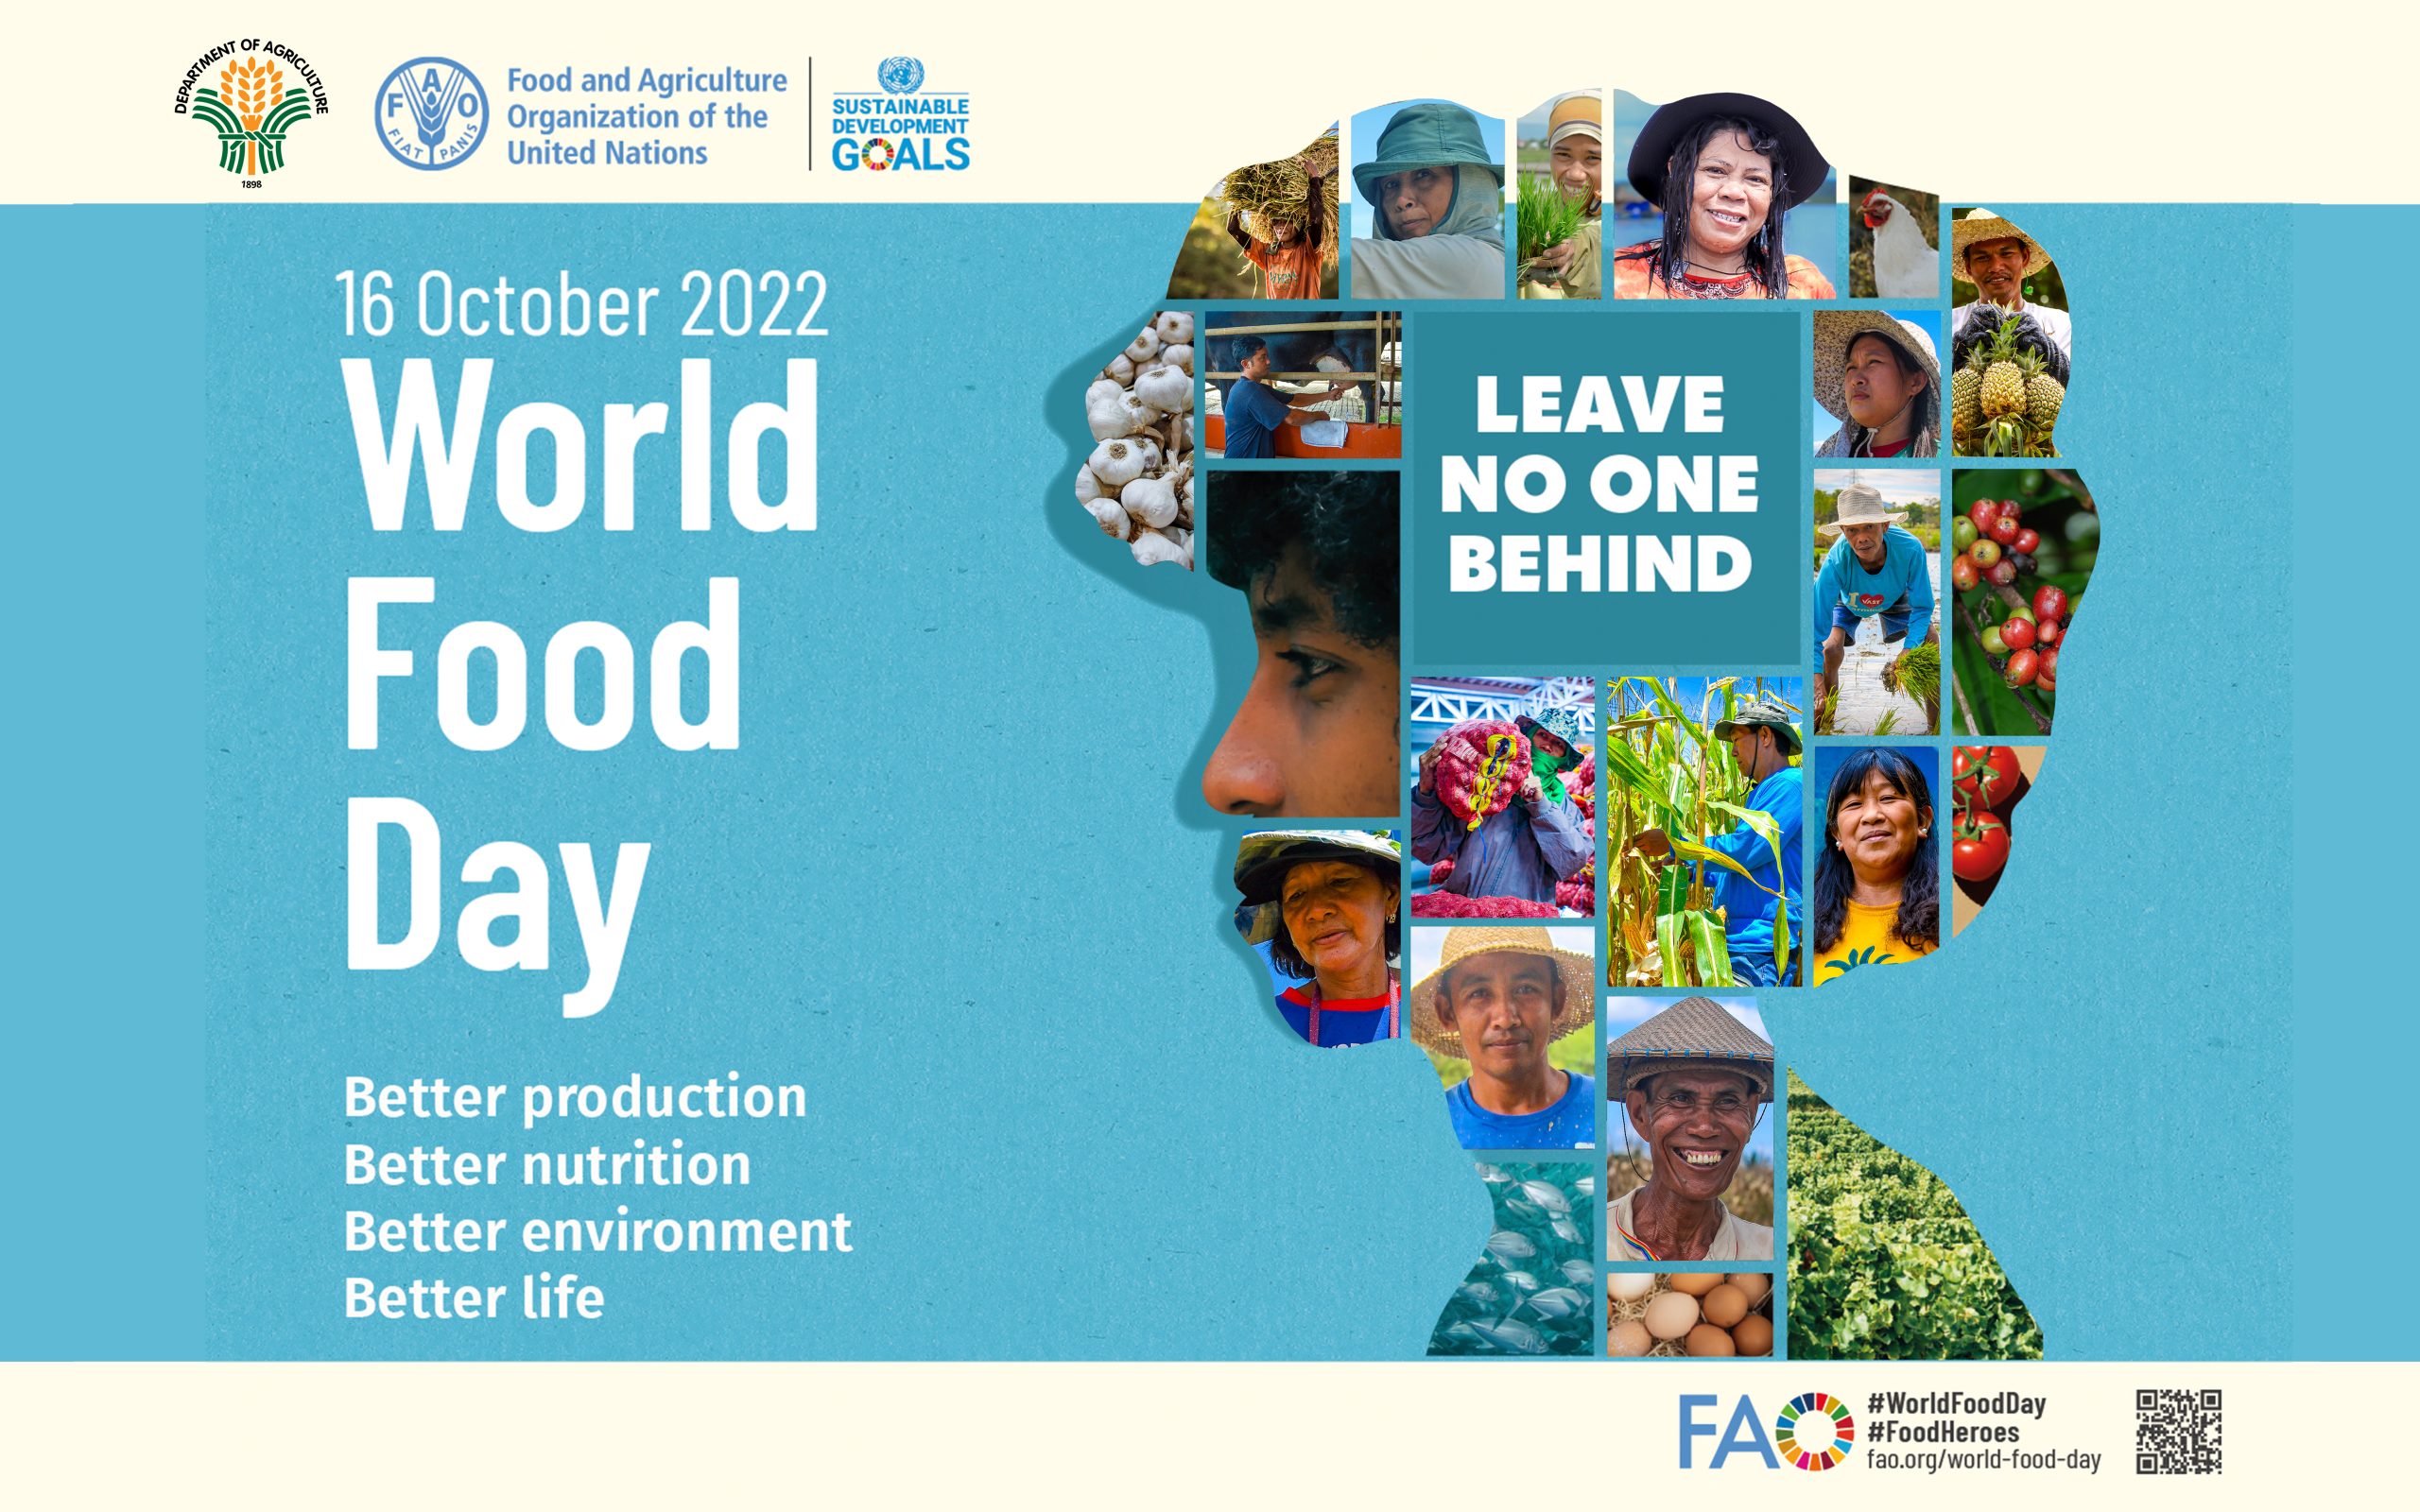 DA Leaves No One Behind on World Food Day 2022